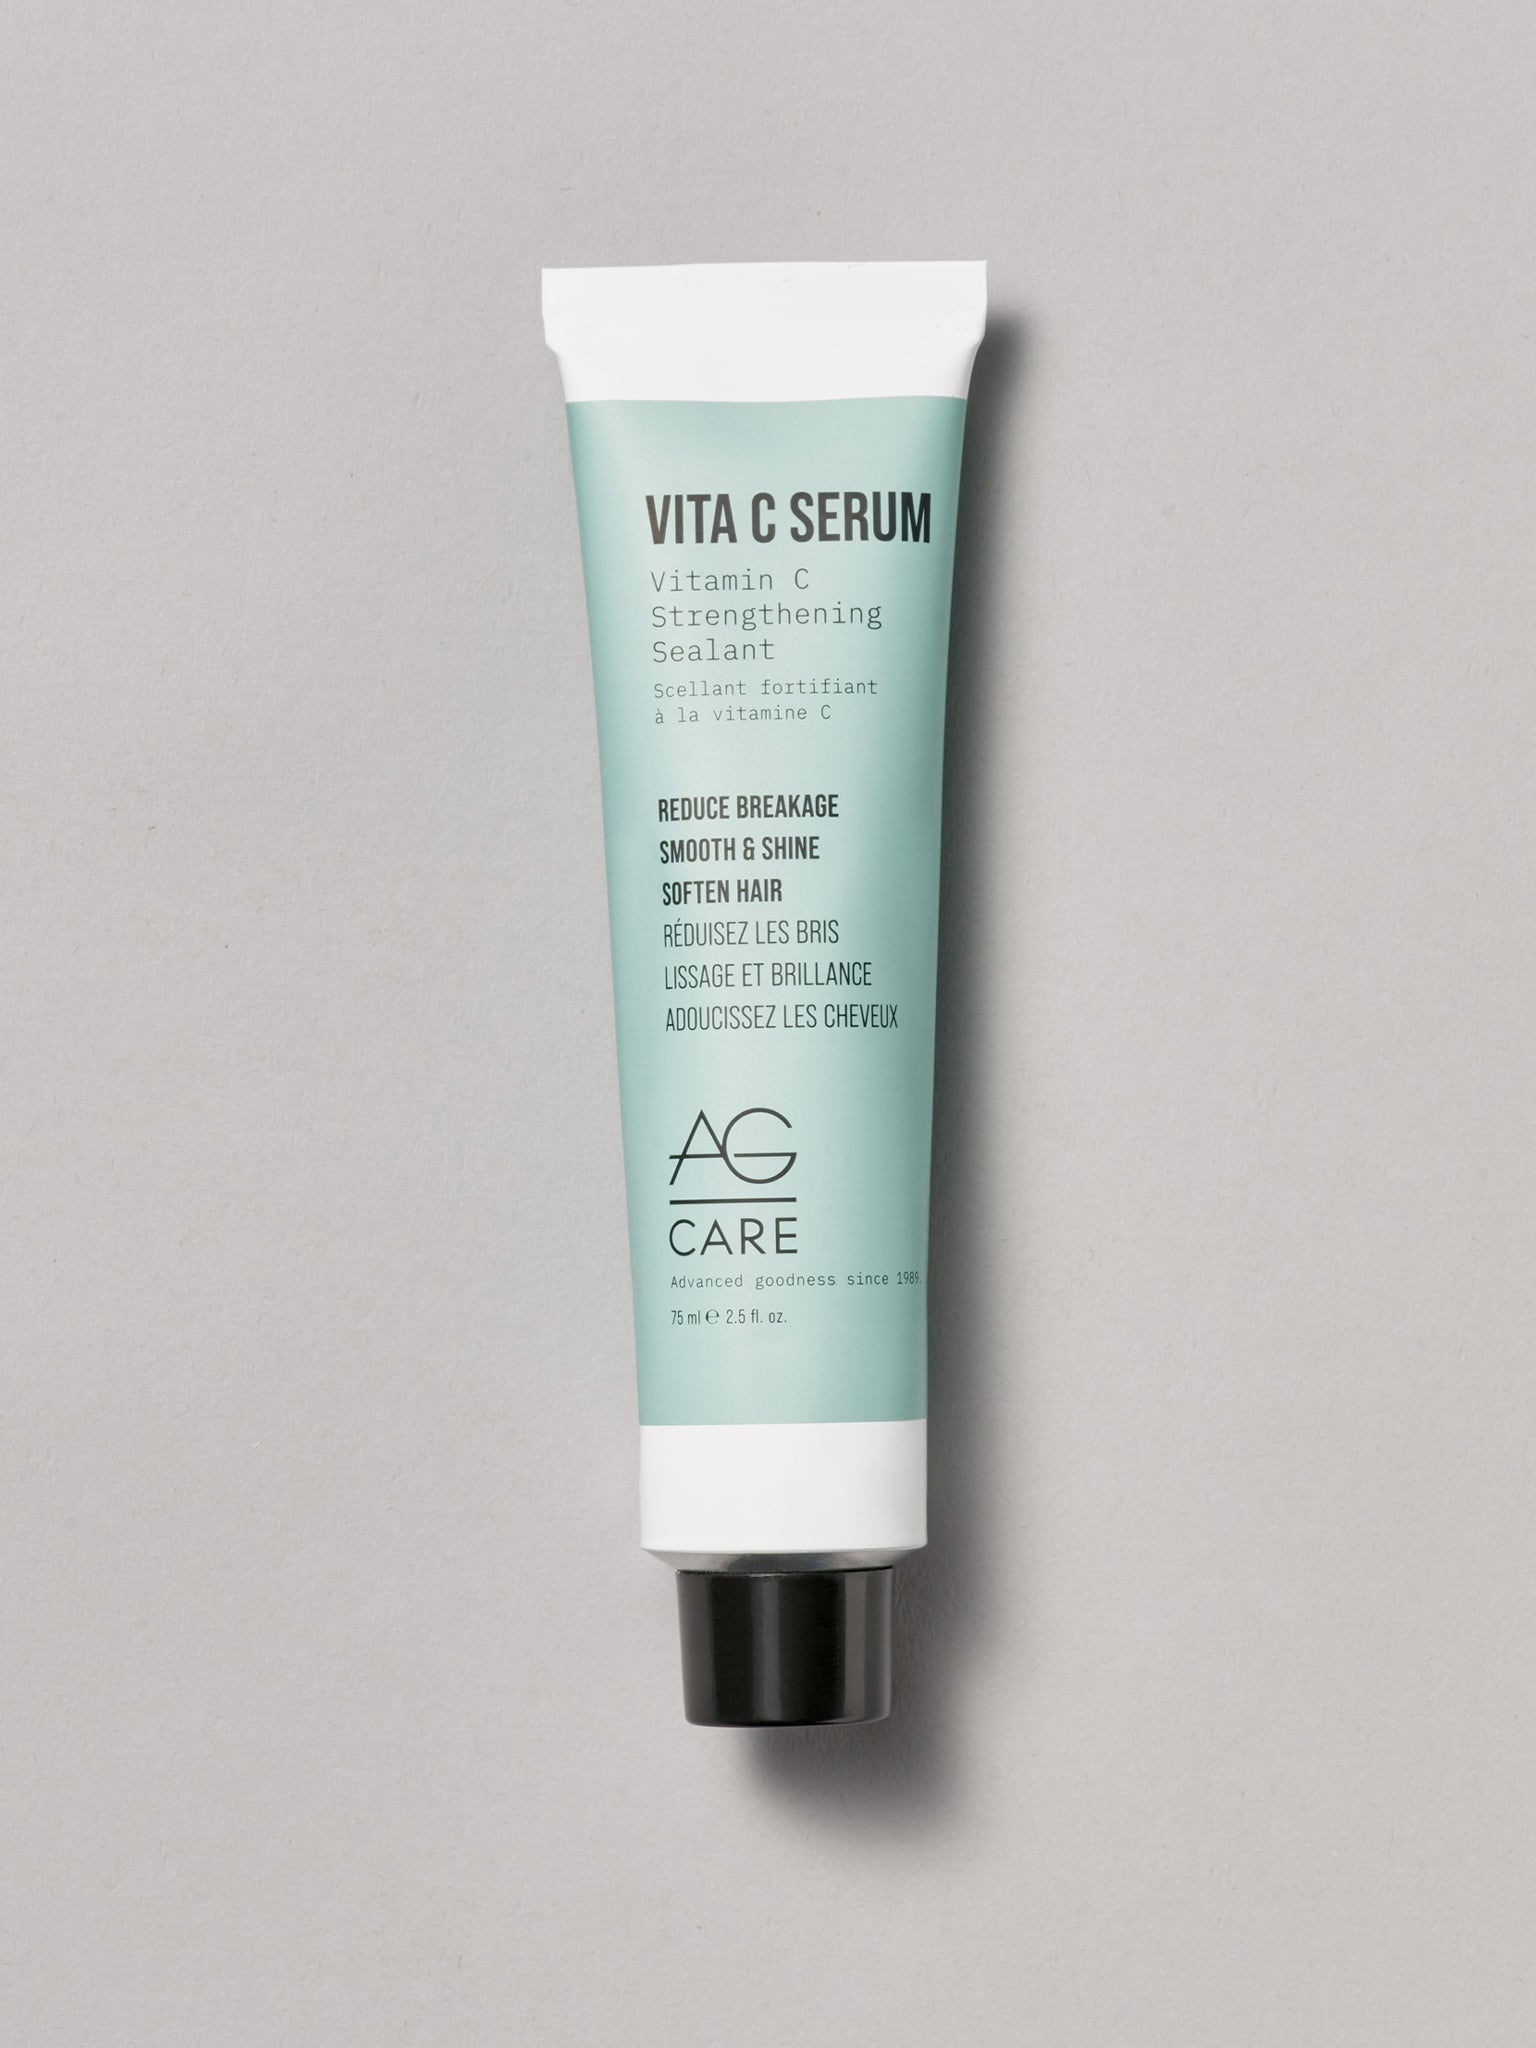 VITA C TRIO: Strengthen & Recover - by AG Hair |ProCare Outlet|